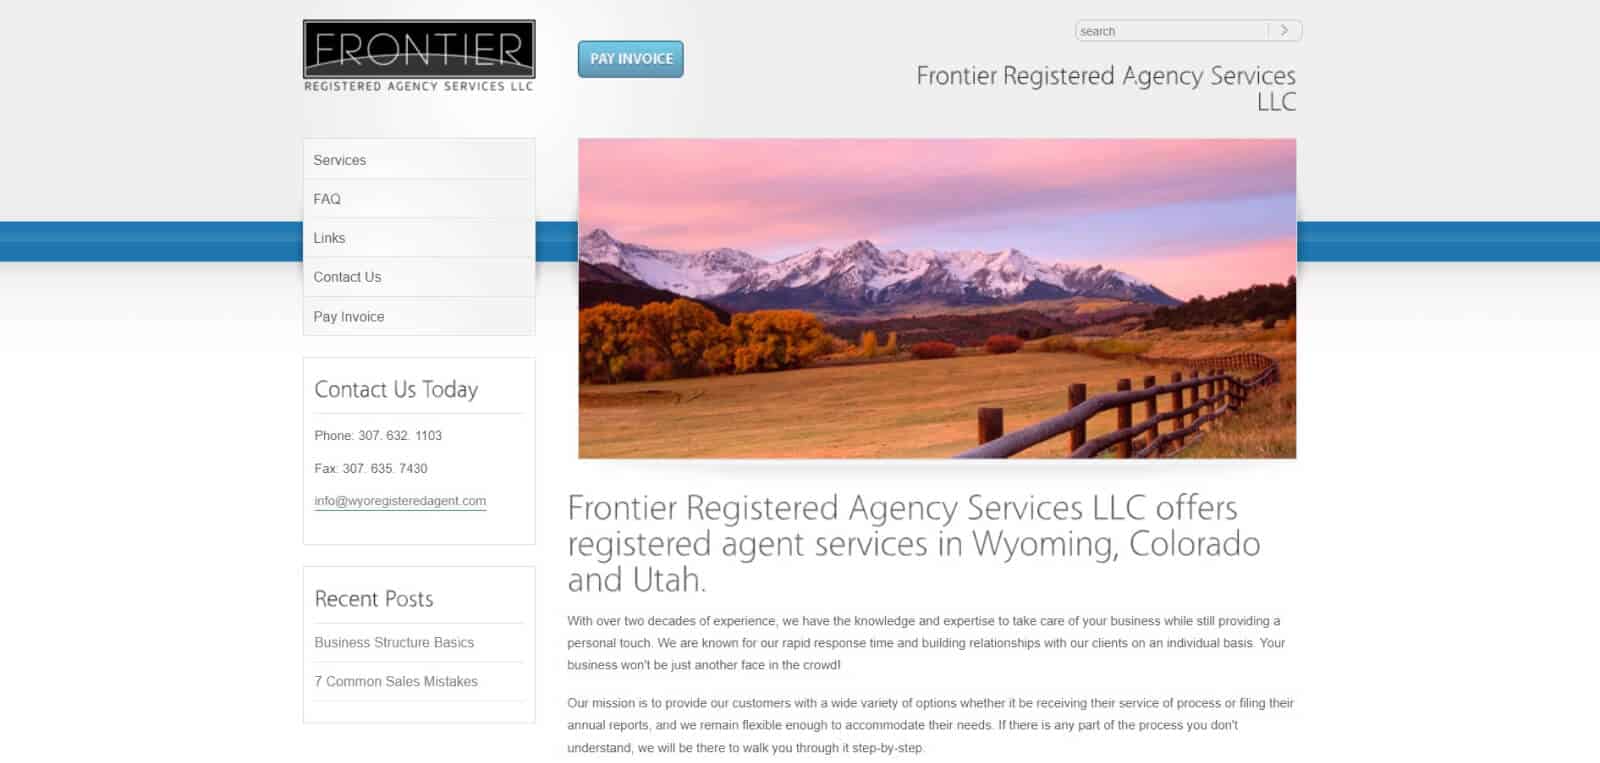 Frontier Registered Agent Services LLC